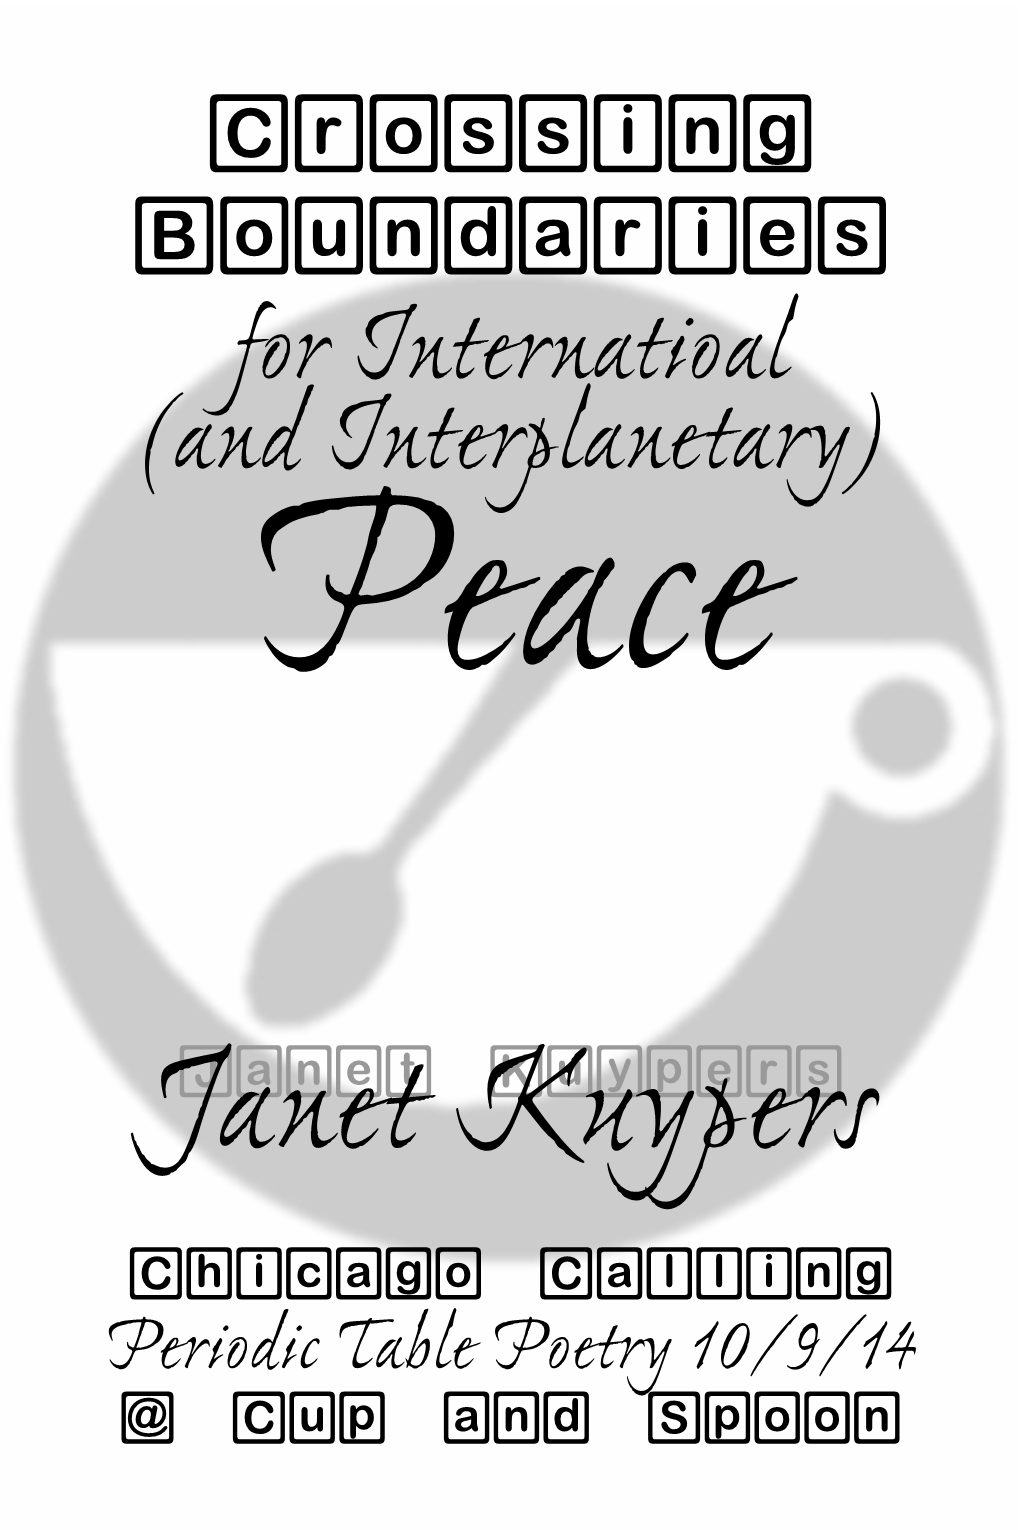 (And Interplanetary) Peace